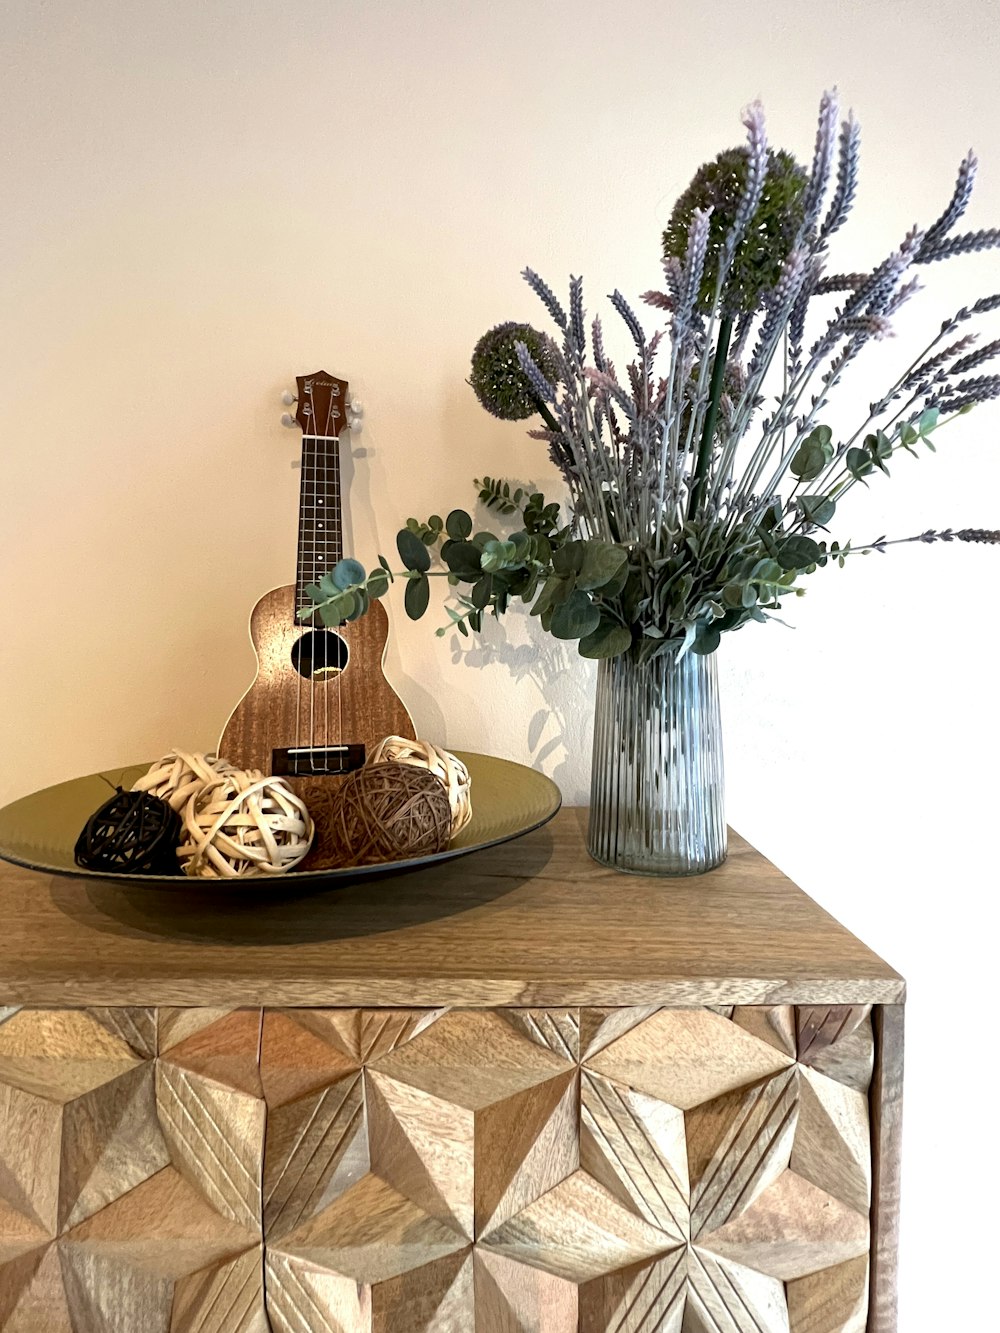 a wooden table topped with a guitar and a vase filled with flowers